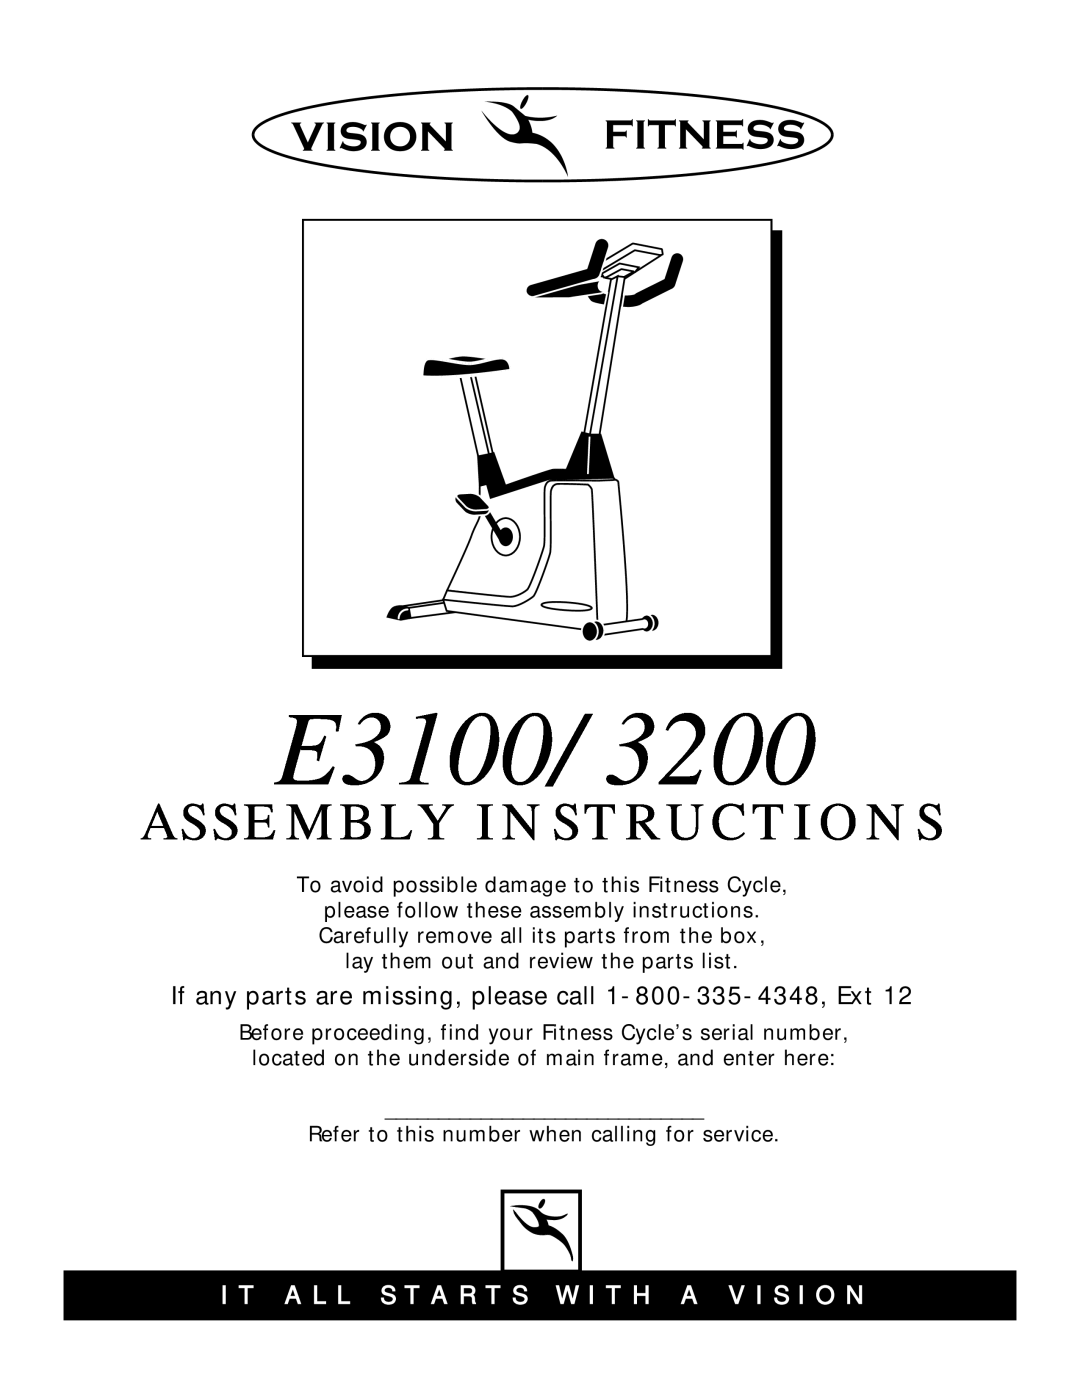 Vision Fitness E3100/3200 manual Vision Fitness, If any parts are missing, please call 1-800-335-4348, Ext 